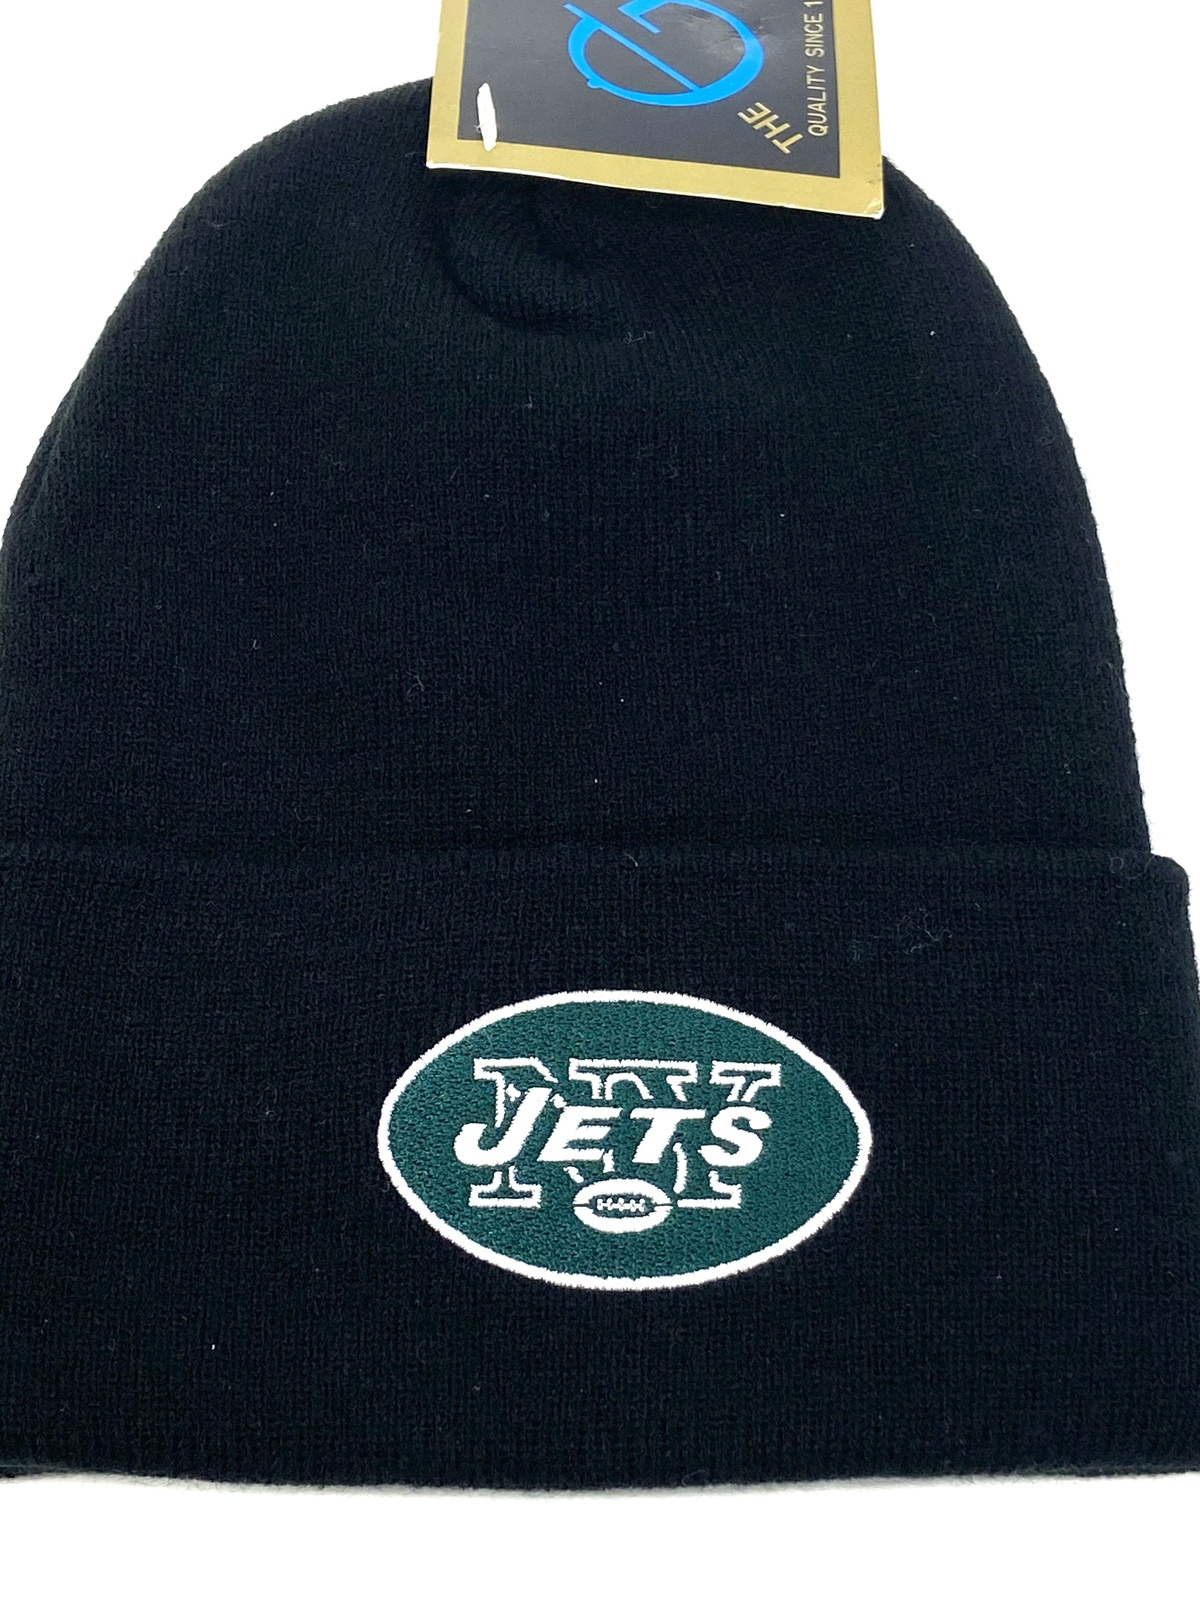 Primary image for New York Jets Vintage NFL Black Cuffed Logo Knit Hat (New) By G Knit Cap Company